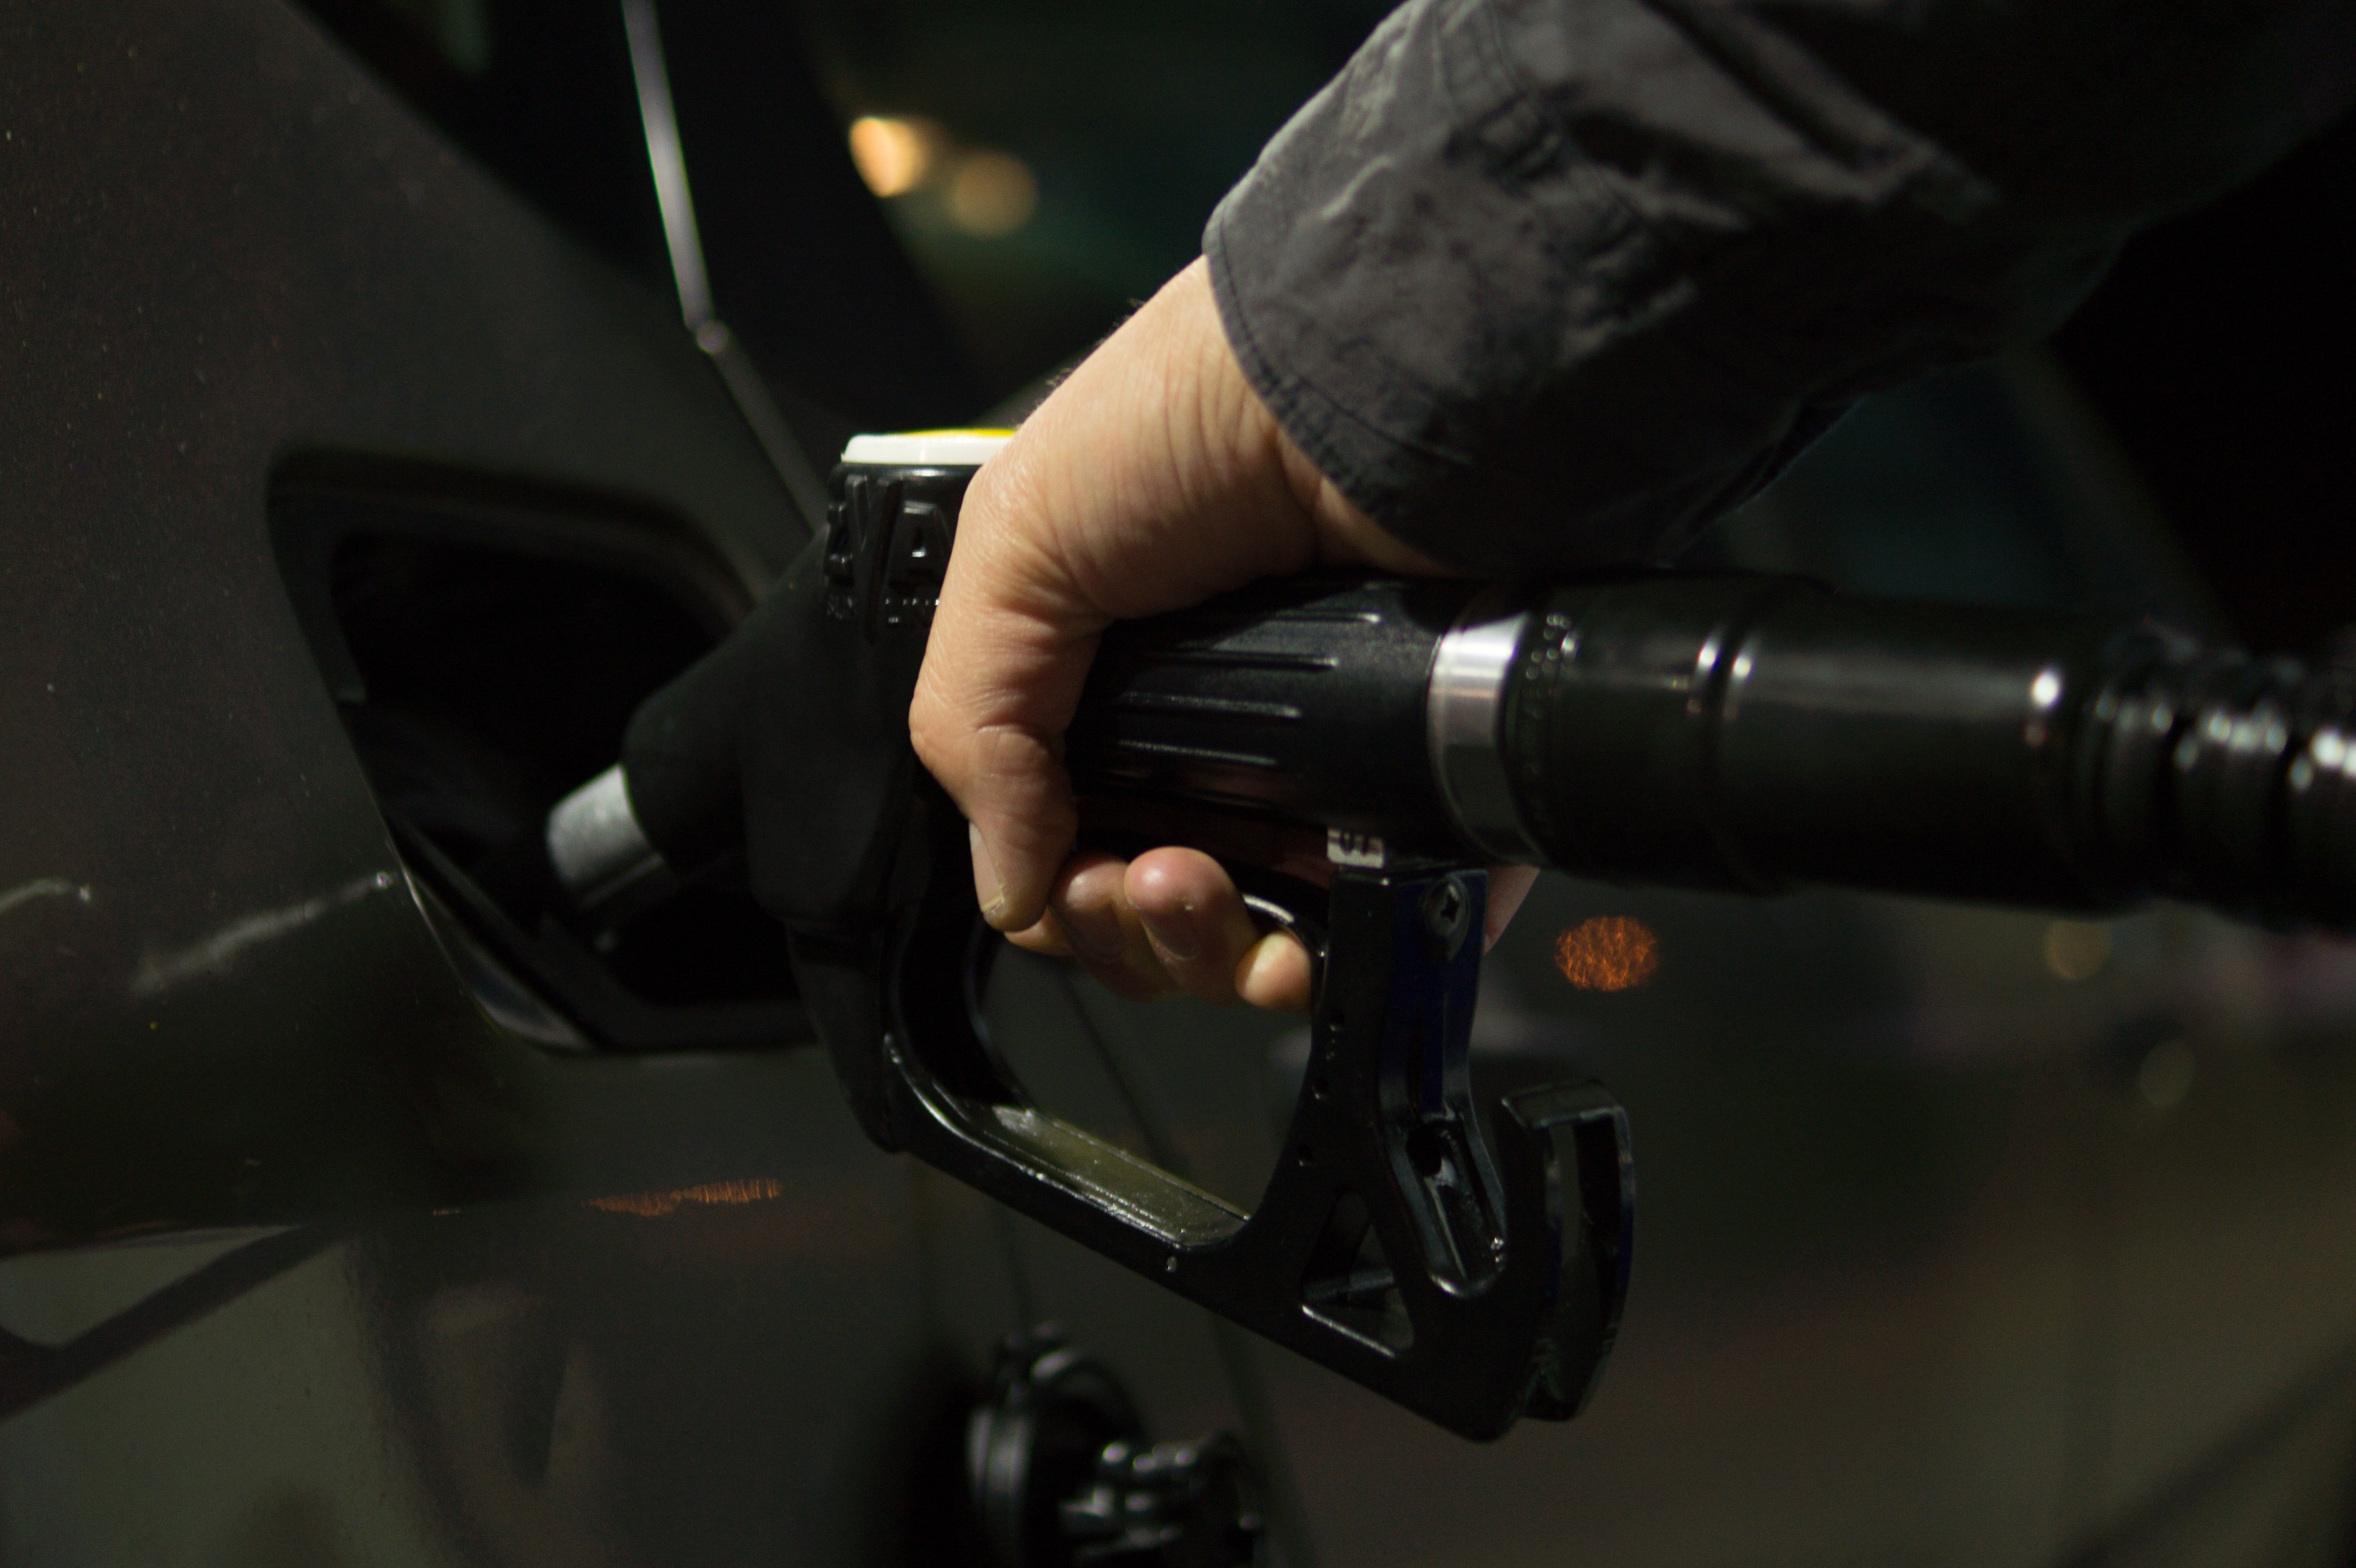 A man fills up his car with fuel at a gas station | Pexels/Skitterphoto